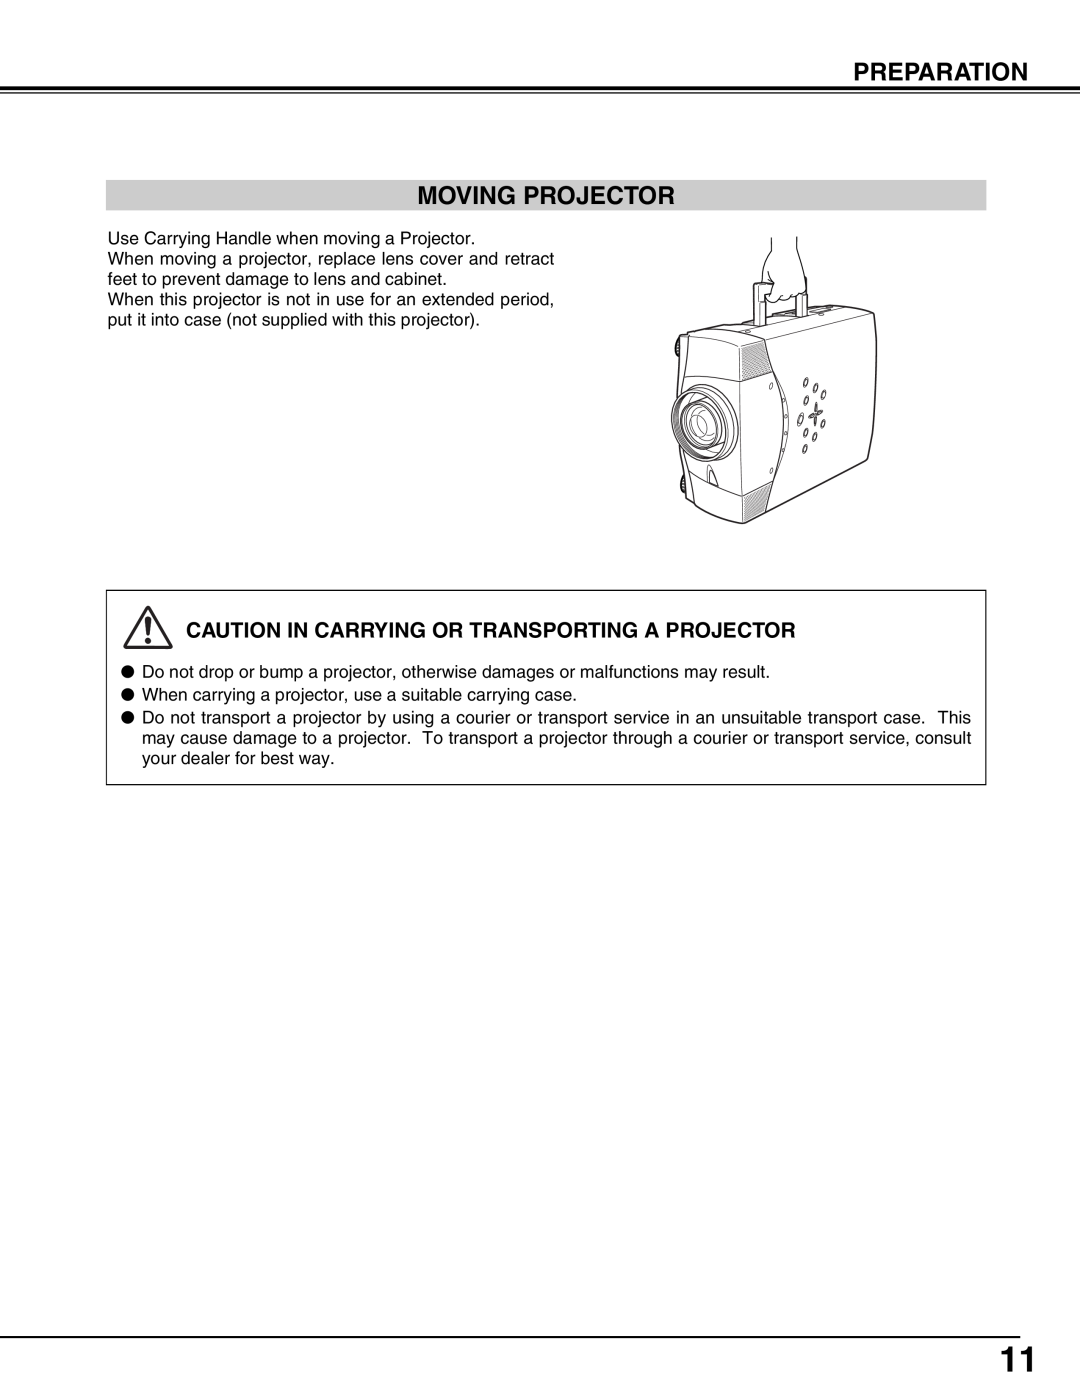 Sanyo PLV-75/PLV-80, PLV75L/PLV-80L Preparation Moving Projector, Caution In Carrying Or Transporting A Projector 